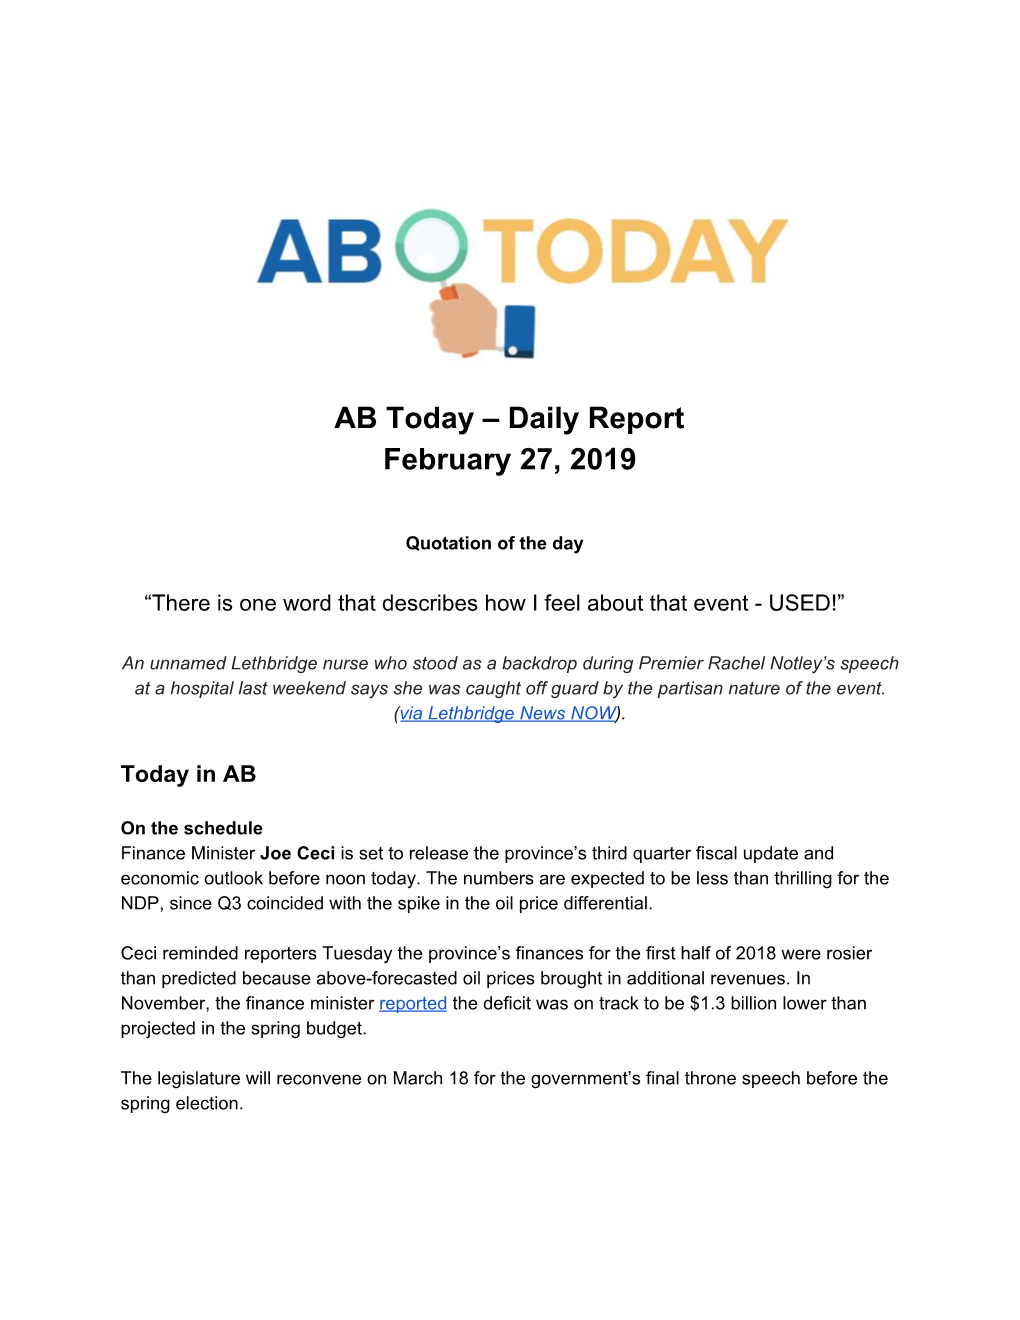 AB Today – Daily Report February 27, 2019